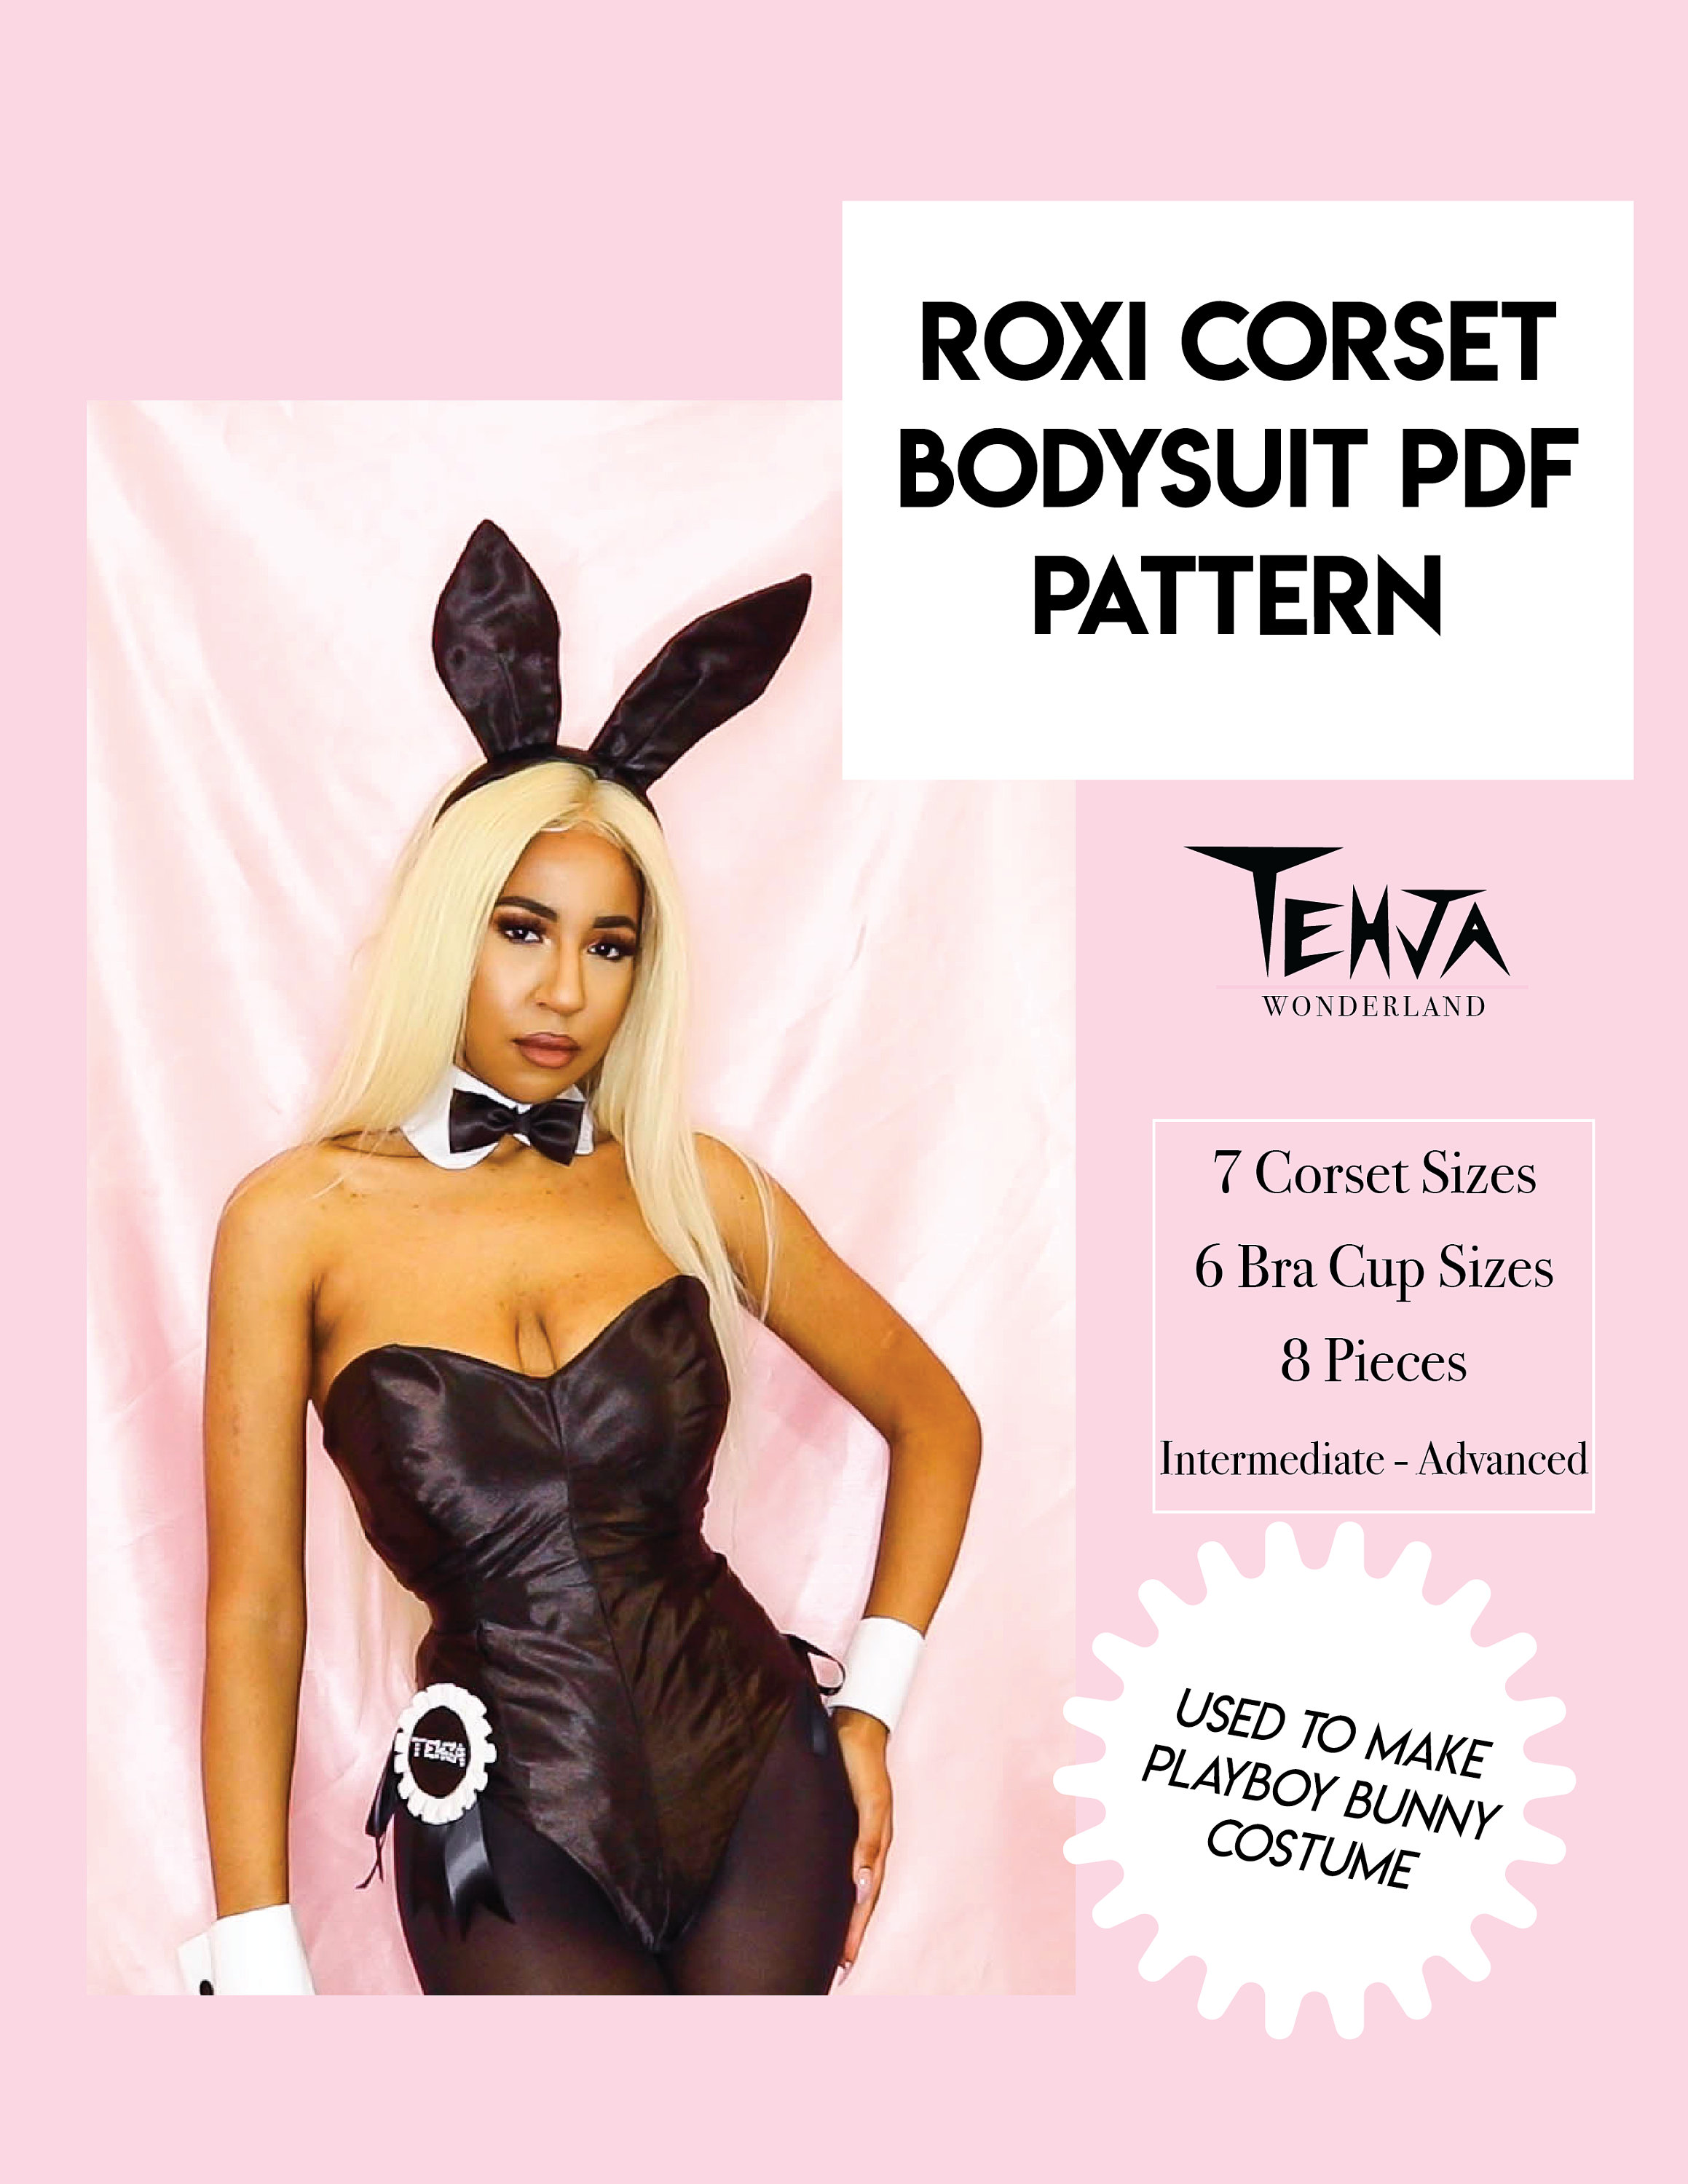 How Much Does a Corset Reduce Your Waist? – Bunny Corset